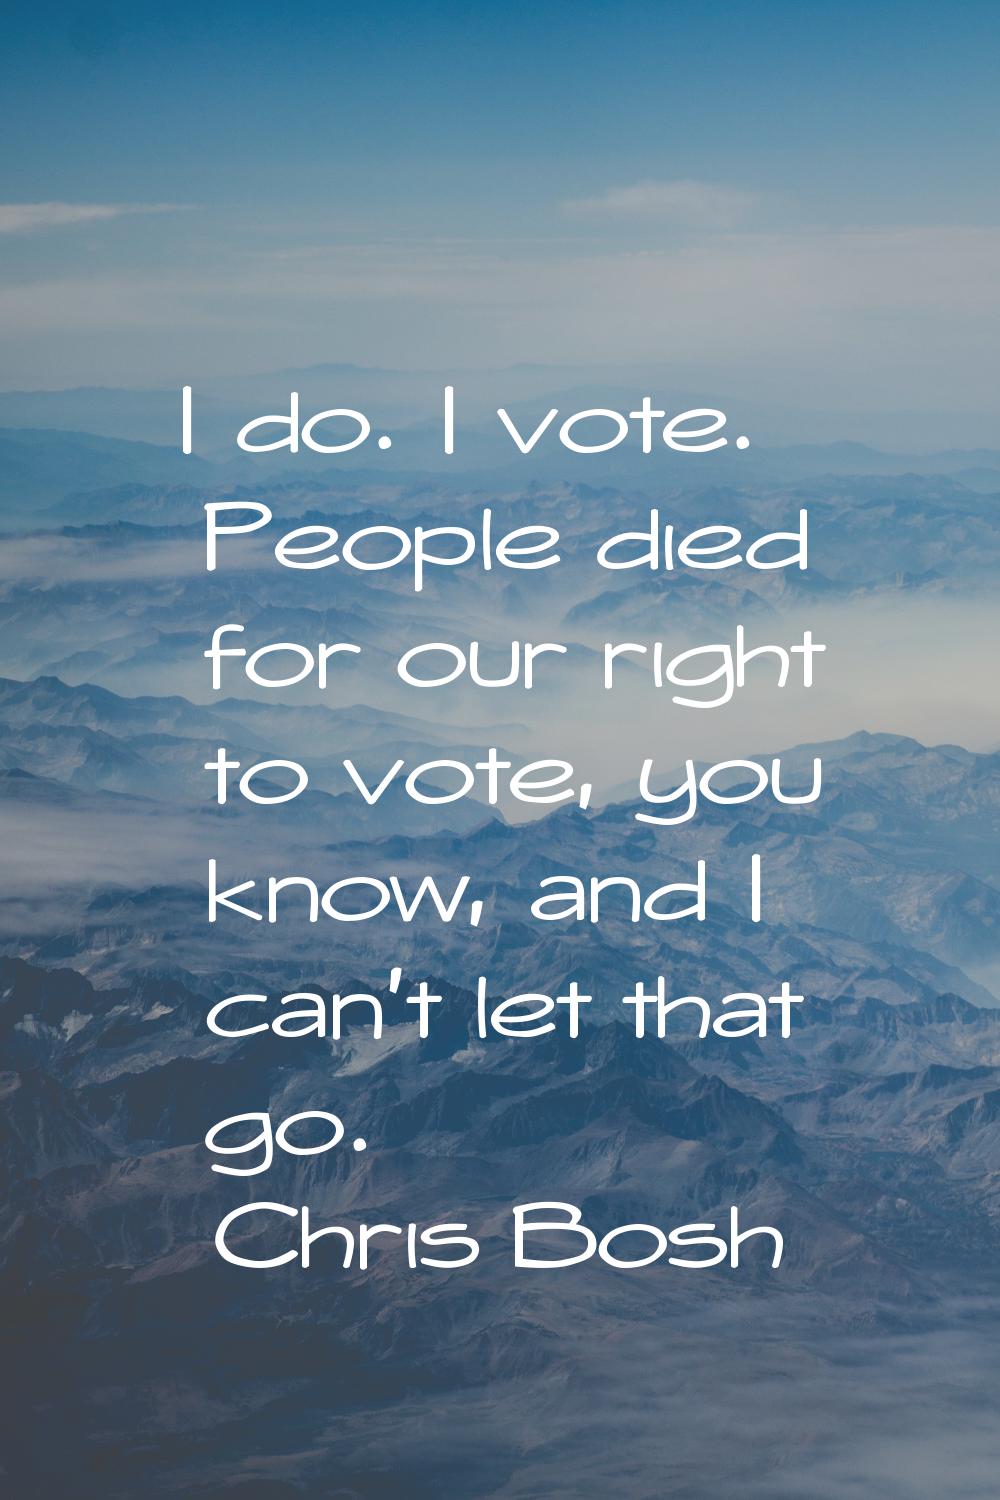 I do. I vote. People died for our right to vote, you know, and I can't let that go.